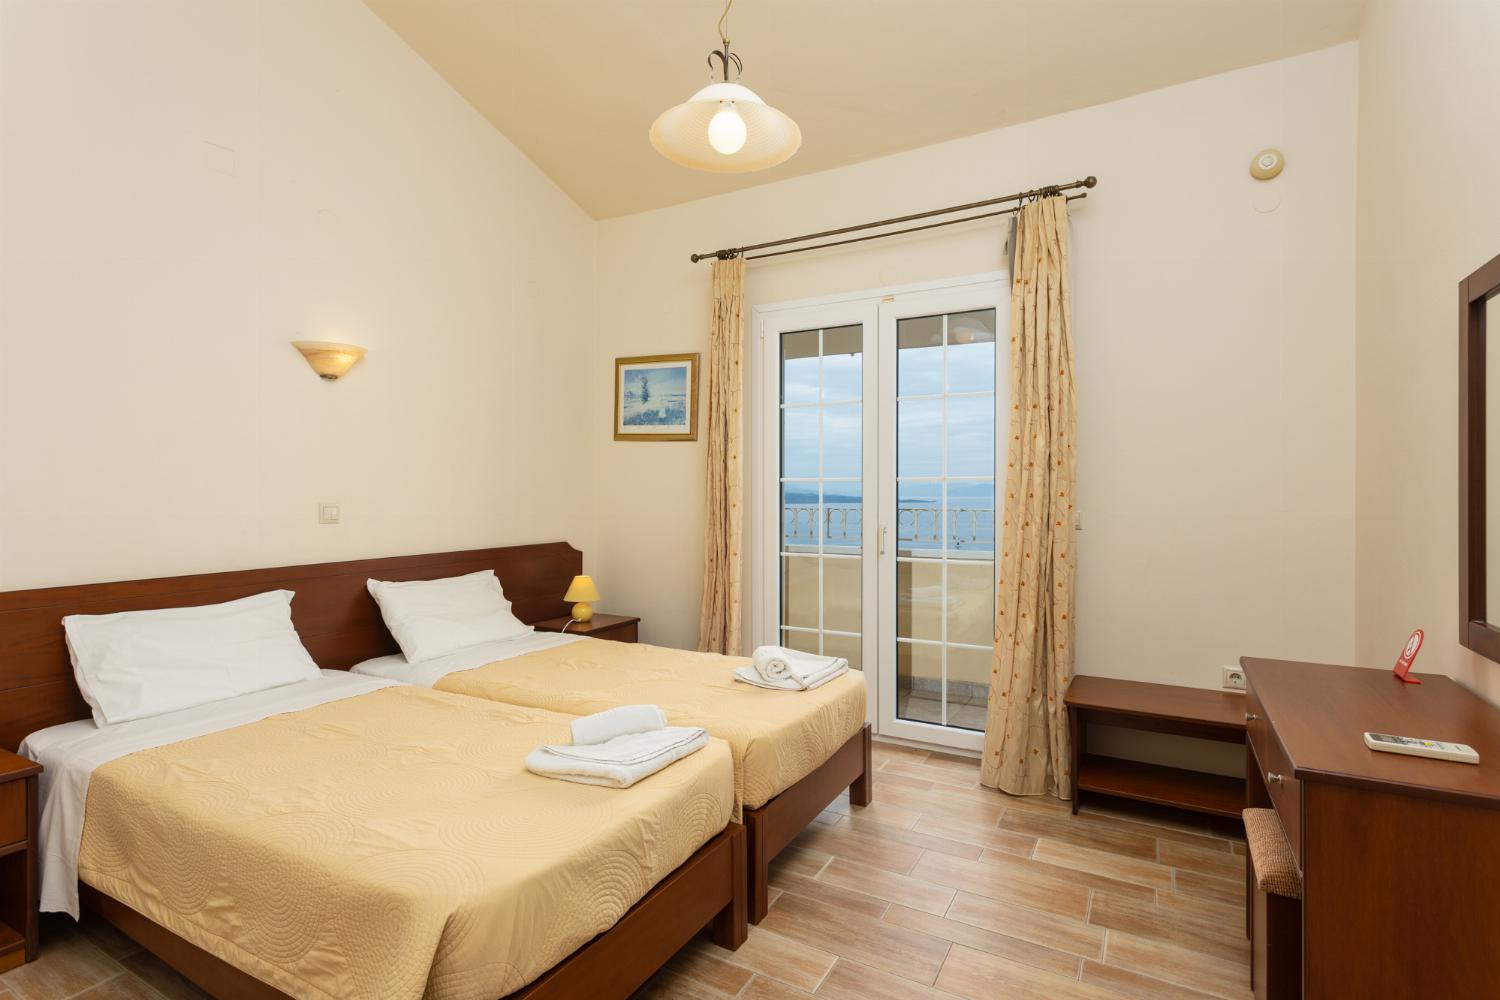 Twin bedroom on second floor with A/C, sea views, and balcony access